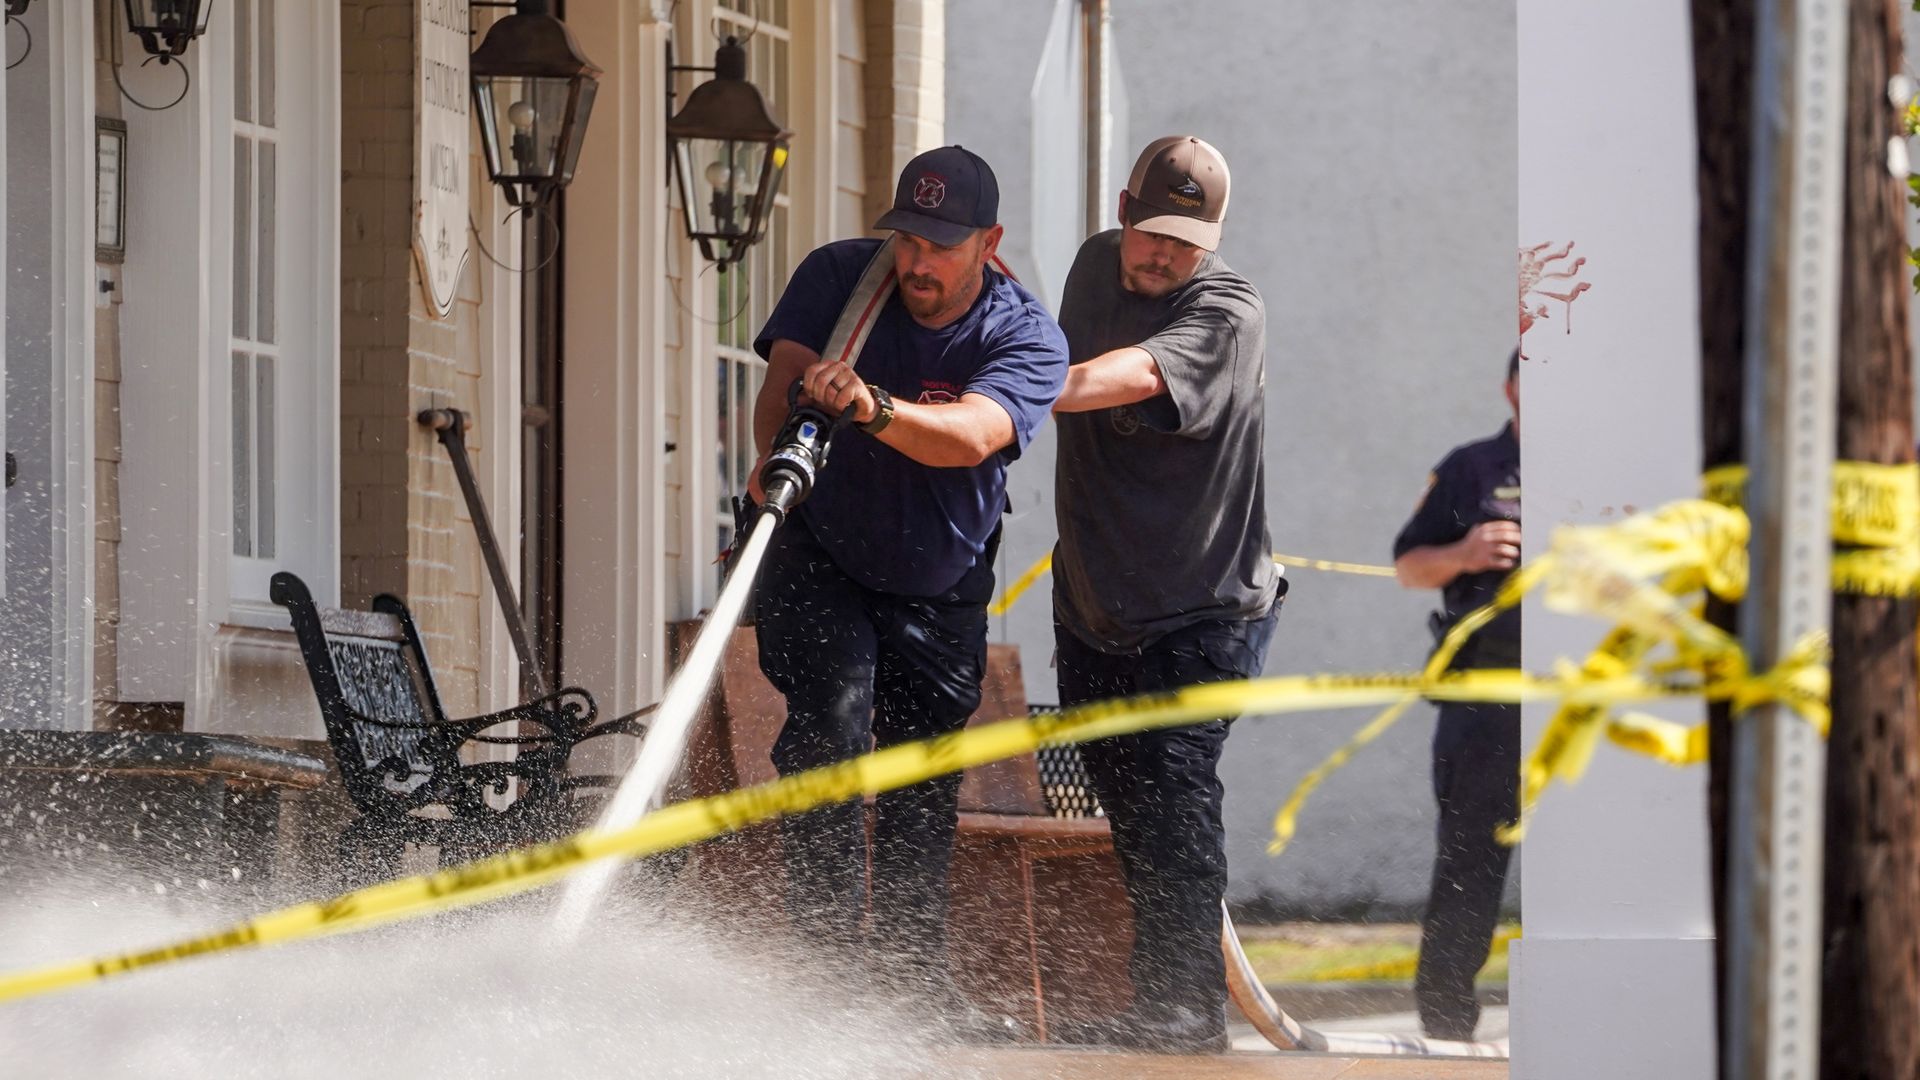 Fire fighters use a hose to wash down the scene of a mass shooting that left four people dead and 28 other wounded in Dadeville, Alabama, on April 16.